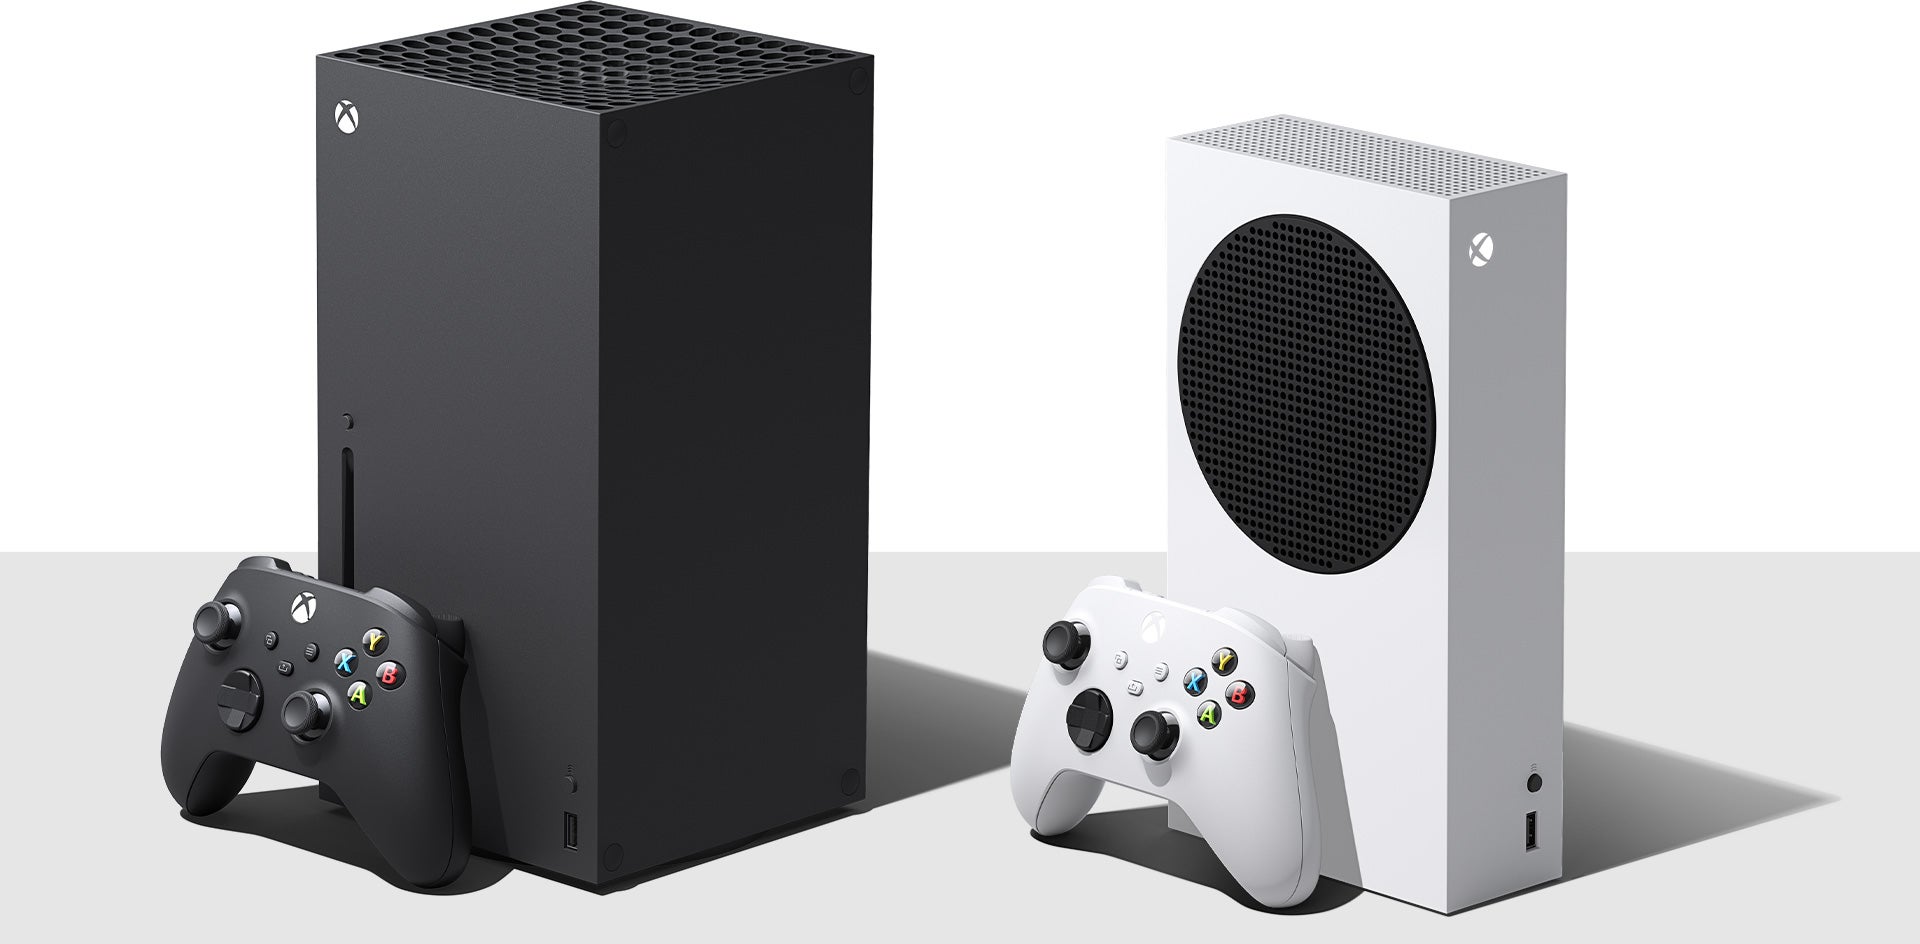 Despite supply issues, Xbox Series X/S is Microsoft's best-selling hardware  generation to date | VG247